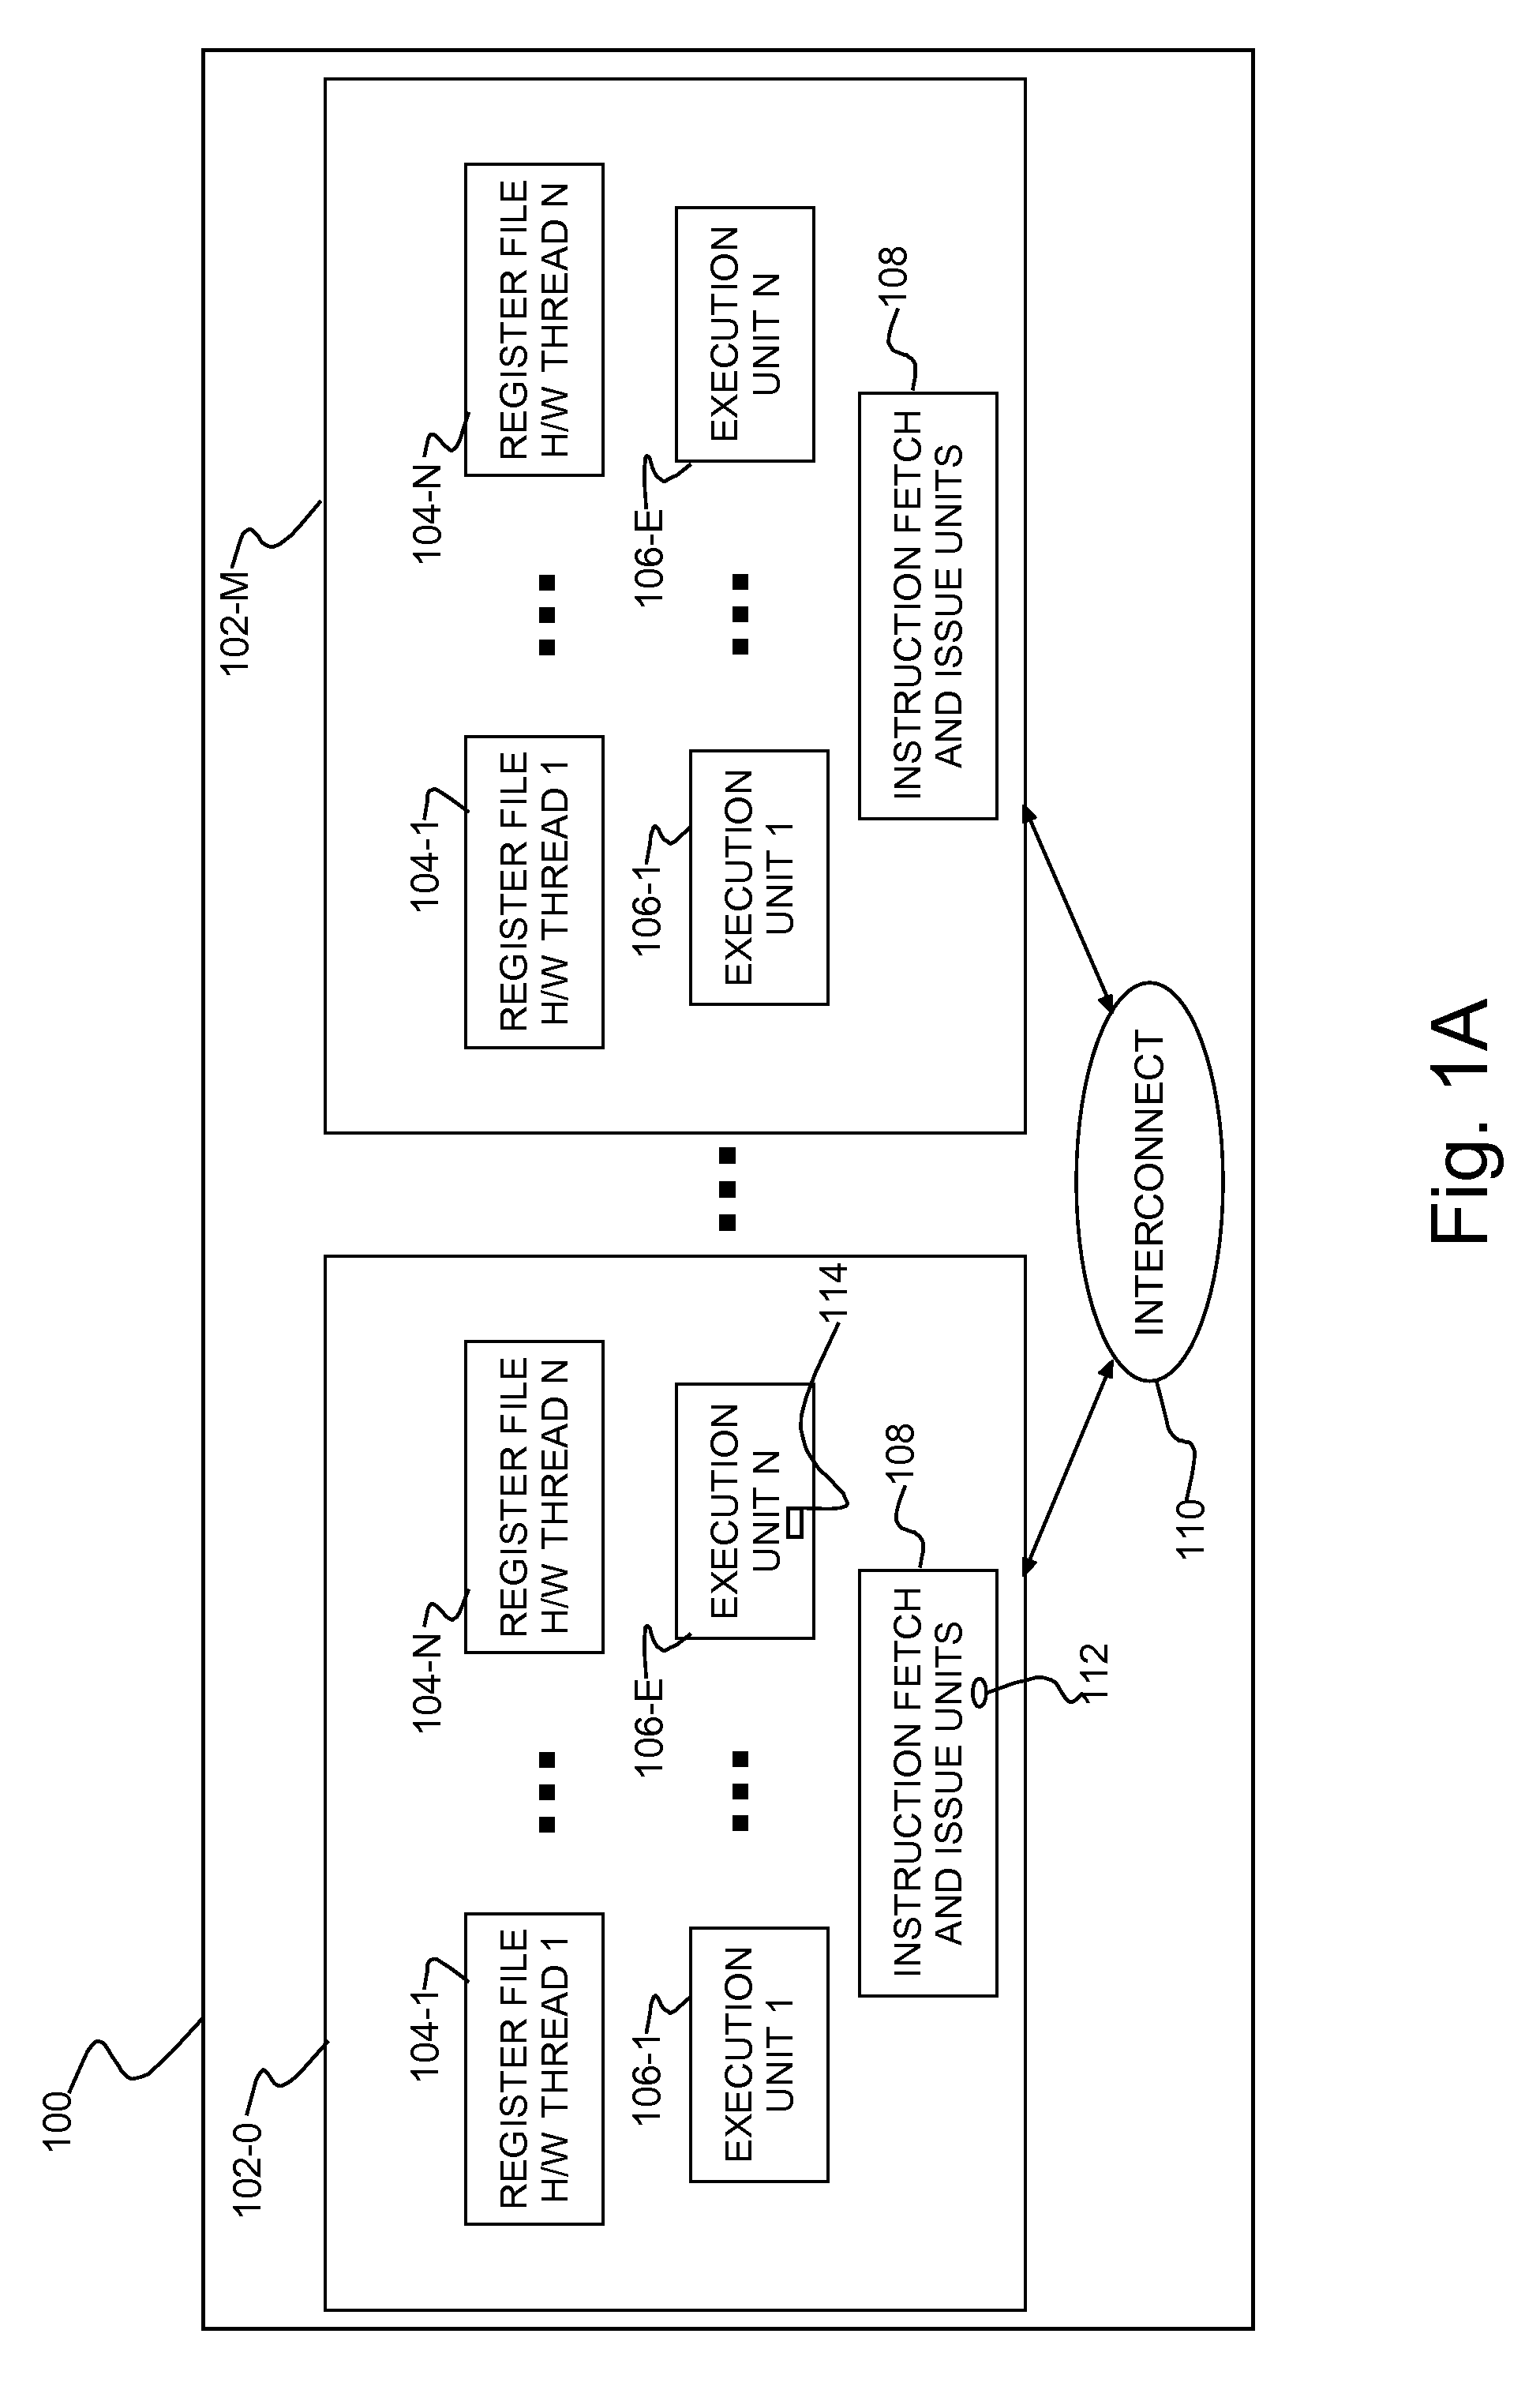 Method of virtualization and OS-level thermal management and multithreaded processor with virtualization and OS-level thermal management